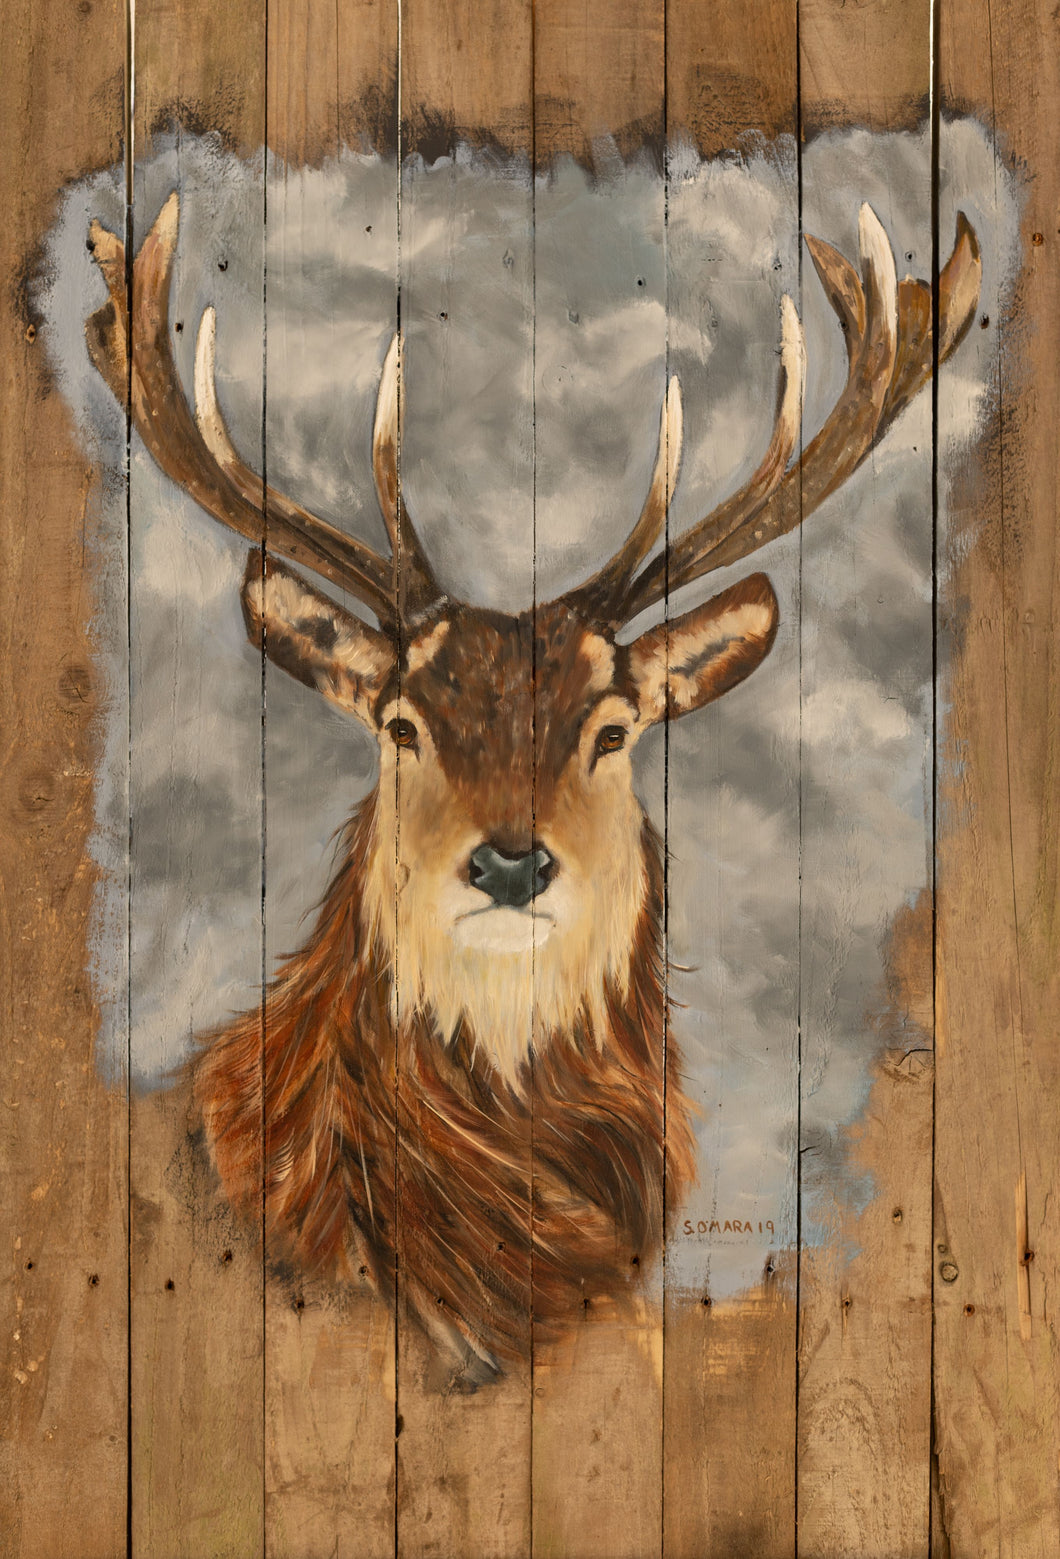 Stag Head on old Wooden Boards an original oil painting